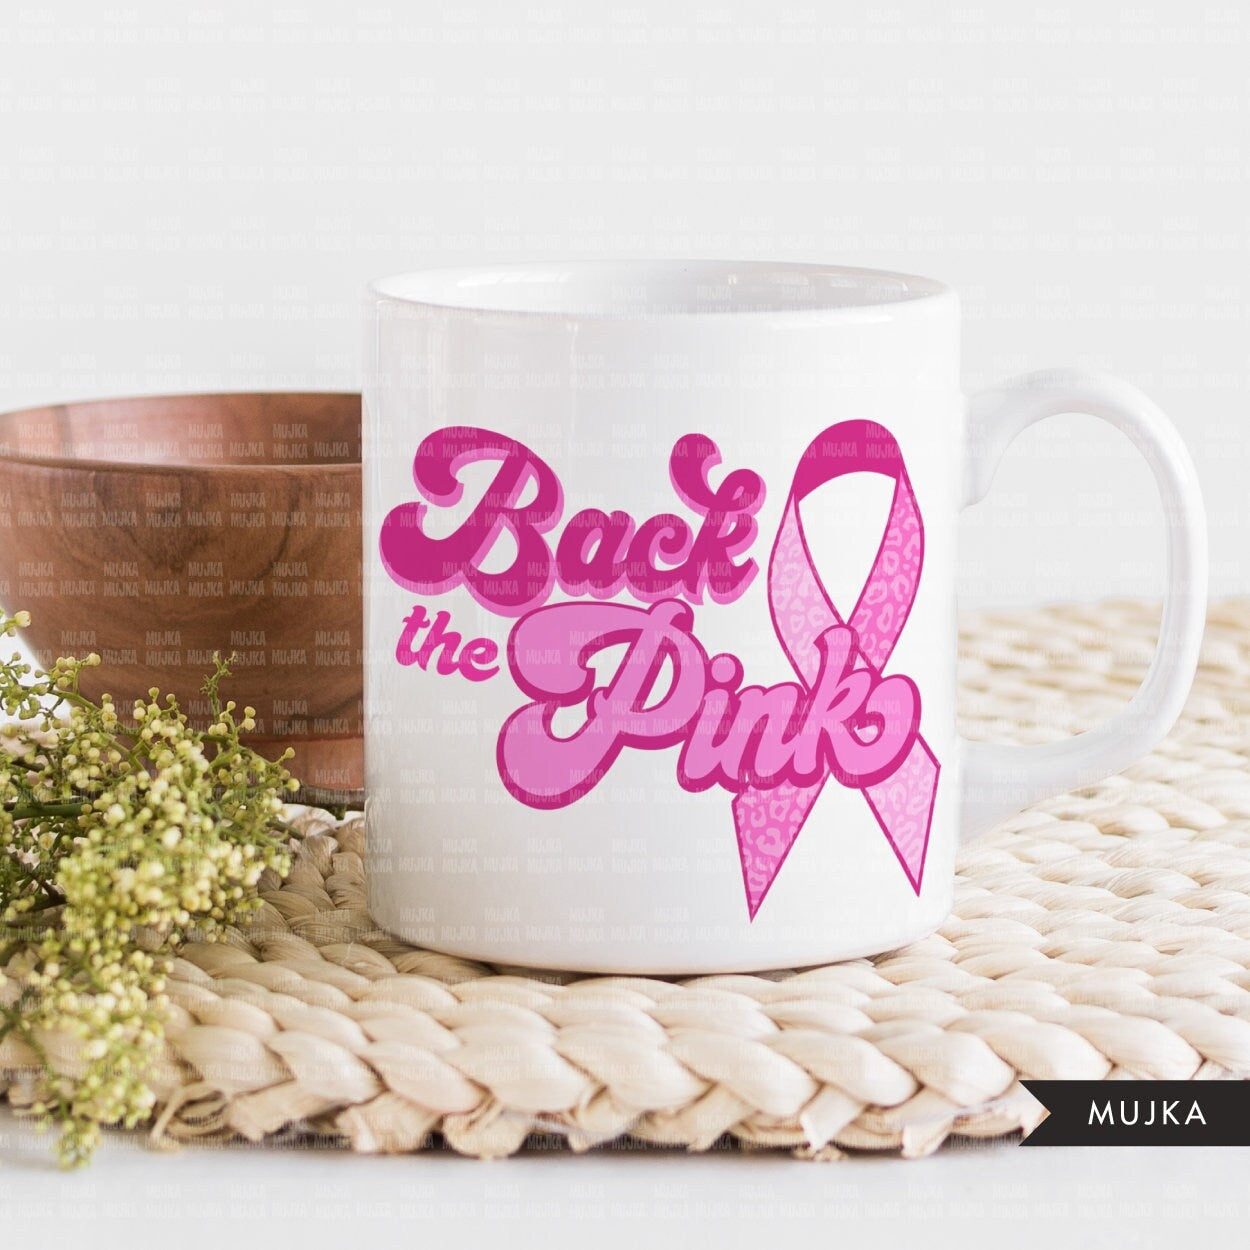 Breast Cancer png, breast cancer sublimation designs, Cancer warrior png, Breast cancer clipart, pink ribbon designs, cancer survivor png